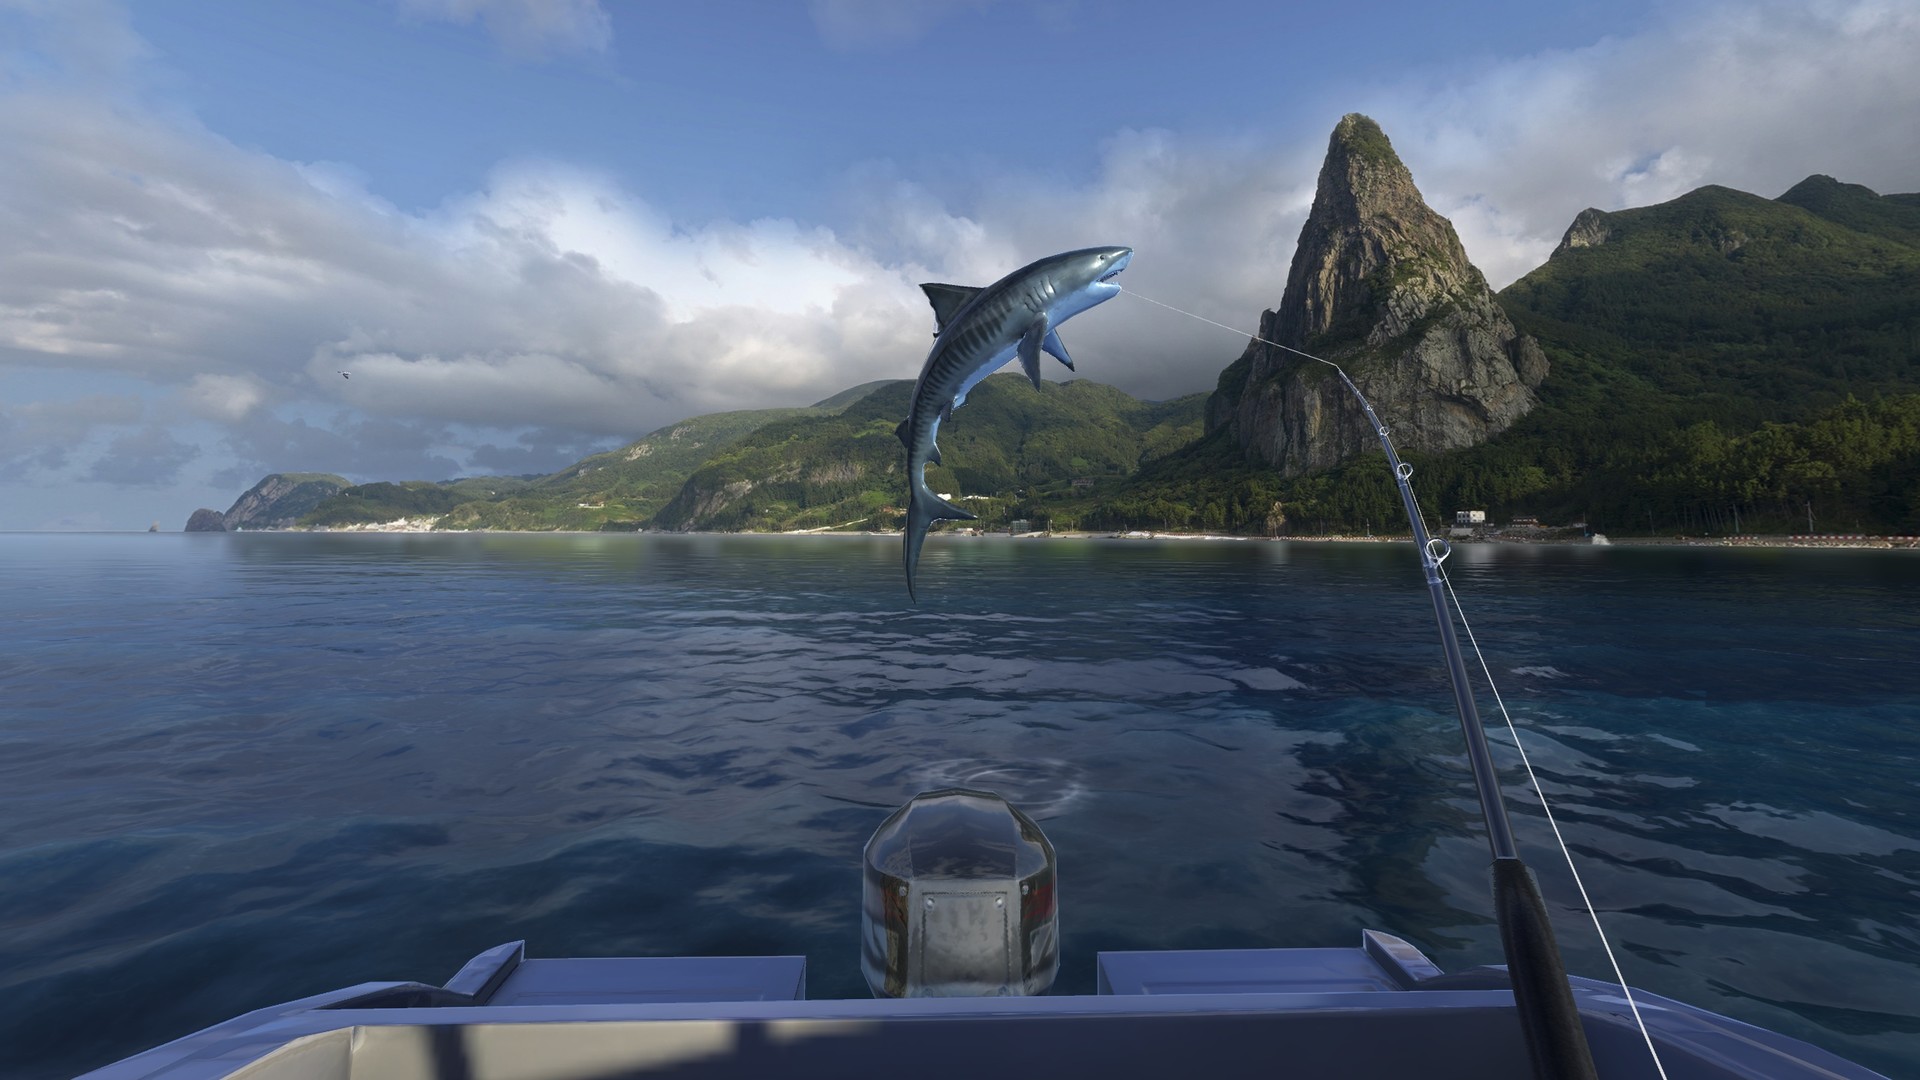 Real VR Fishing Reviews & Overview